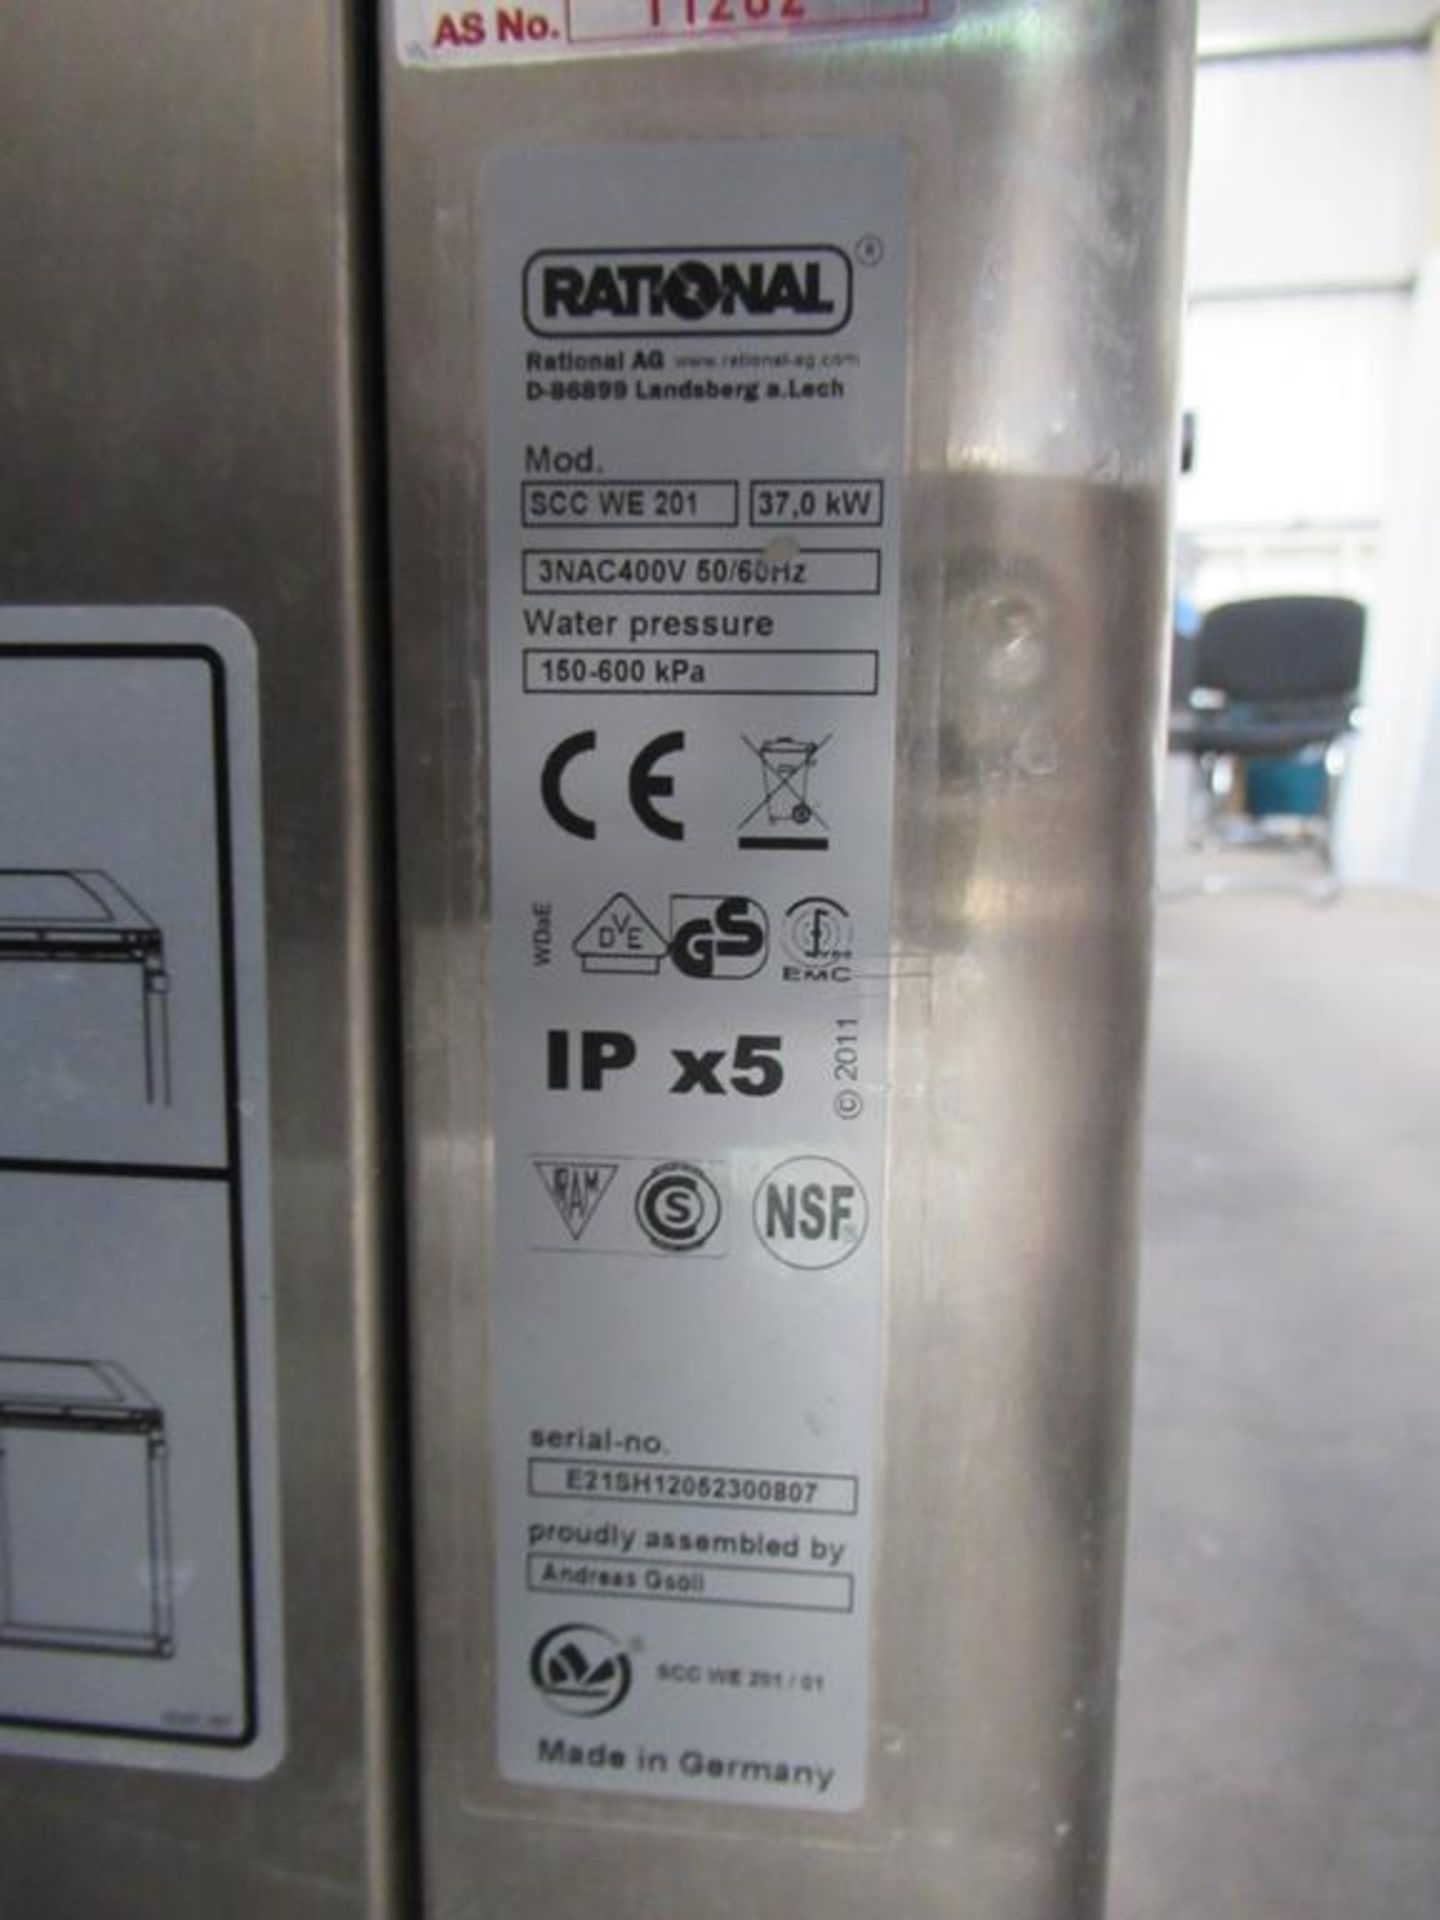 A Rational S/Steel Self Cooking Centre - Image 7 of 7